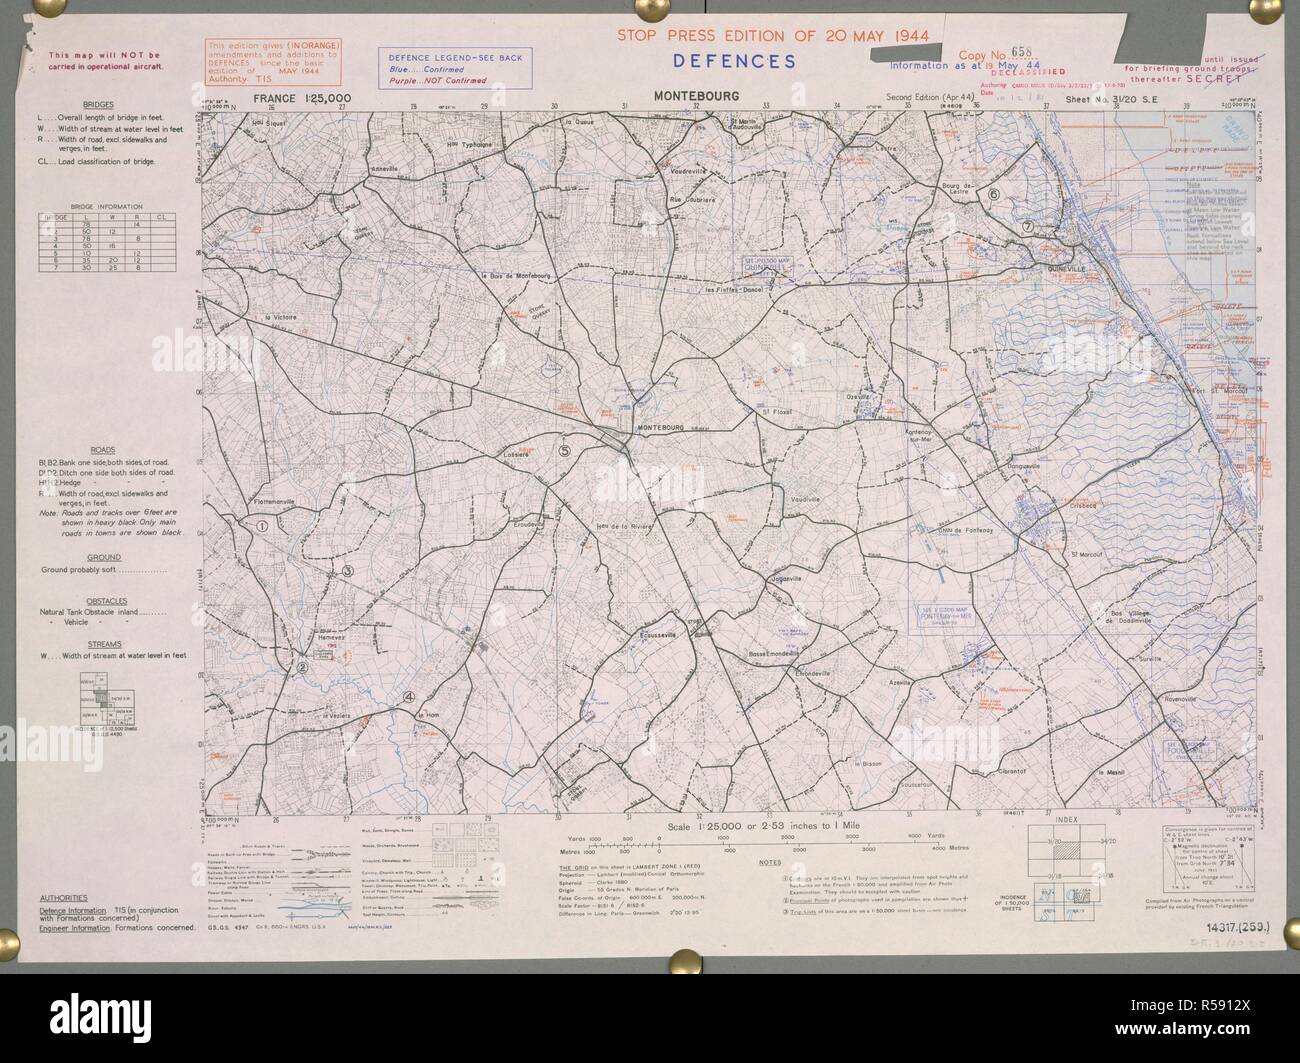 Montebourg, France.  A map of the Second World War. Montebourg was liberated on the 19 June 1944. . France 1:25,000 Defences, Bigot. [London] : War Office, 1944. Source: Maps 14317.(259.) 31-20 SE. Stock Photo